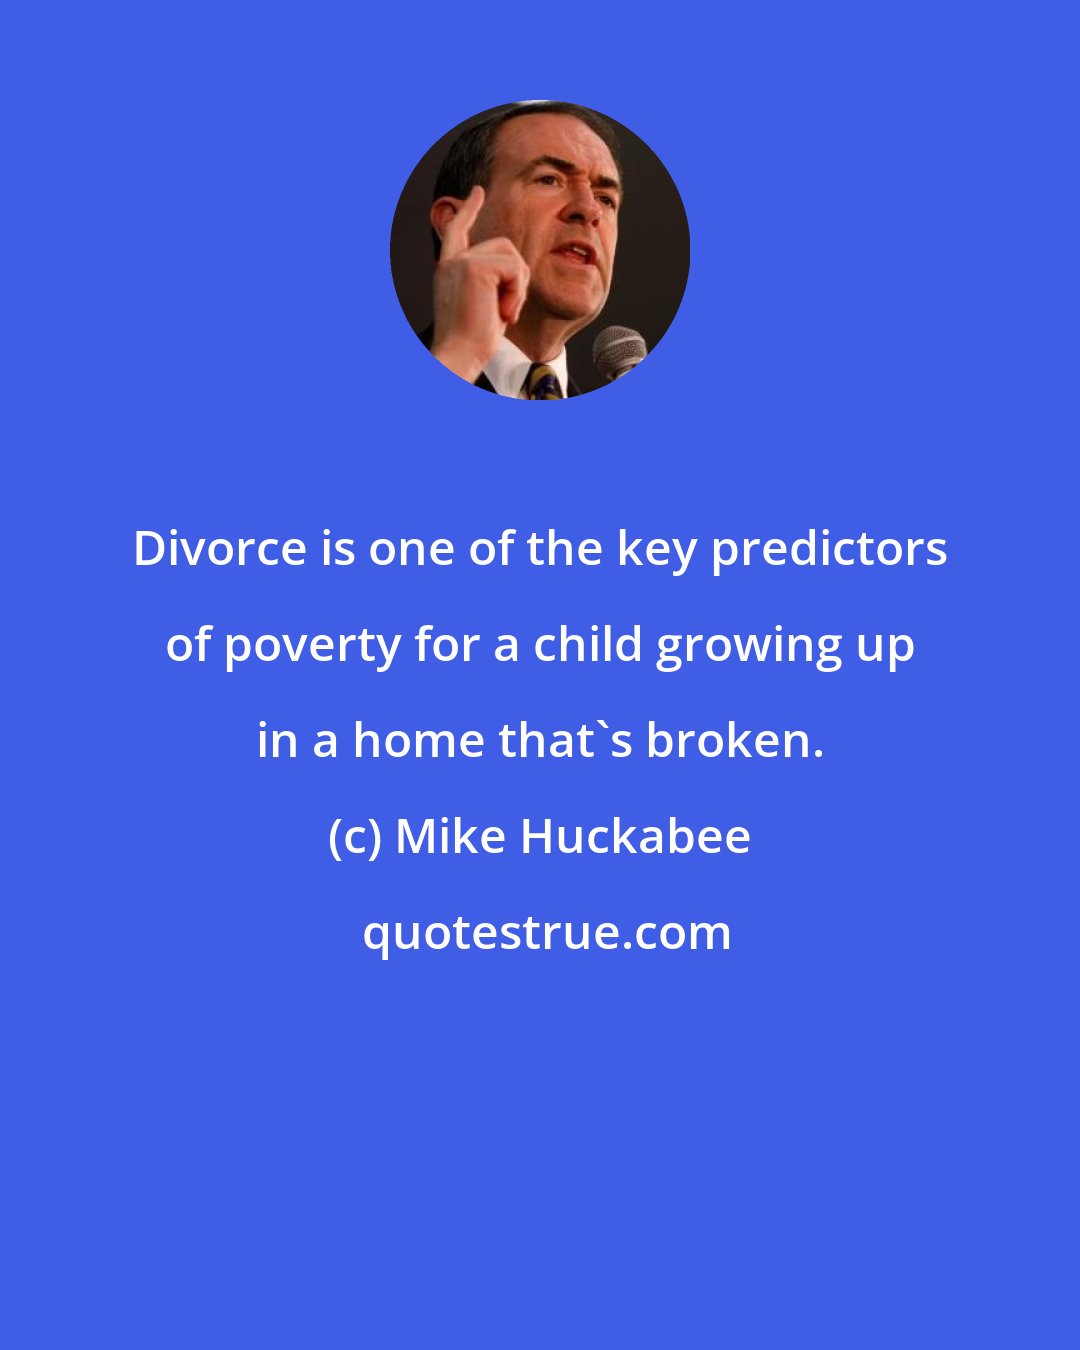 Mike Huckabee: Divorce is one of the key predictors of poverty for a child growing up in a home that's broken.